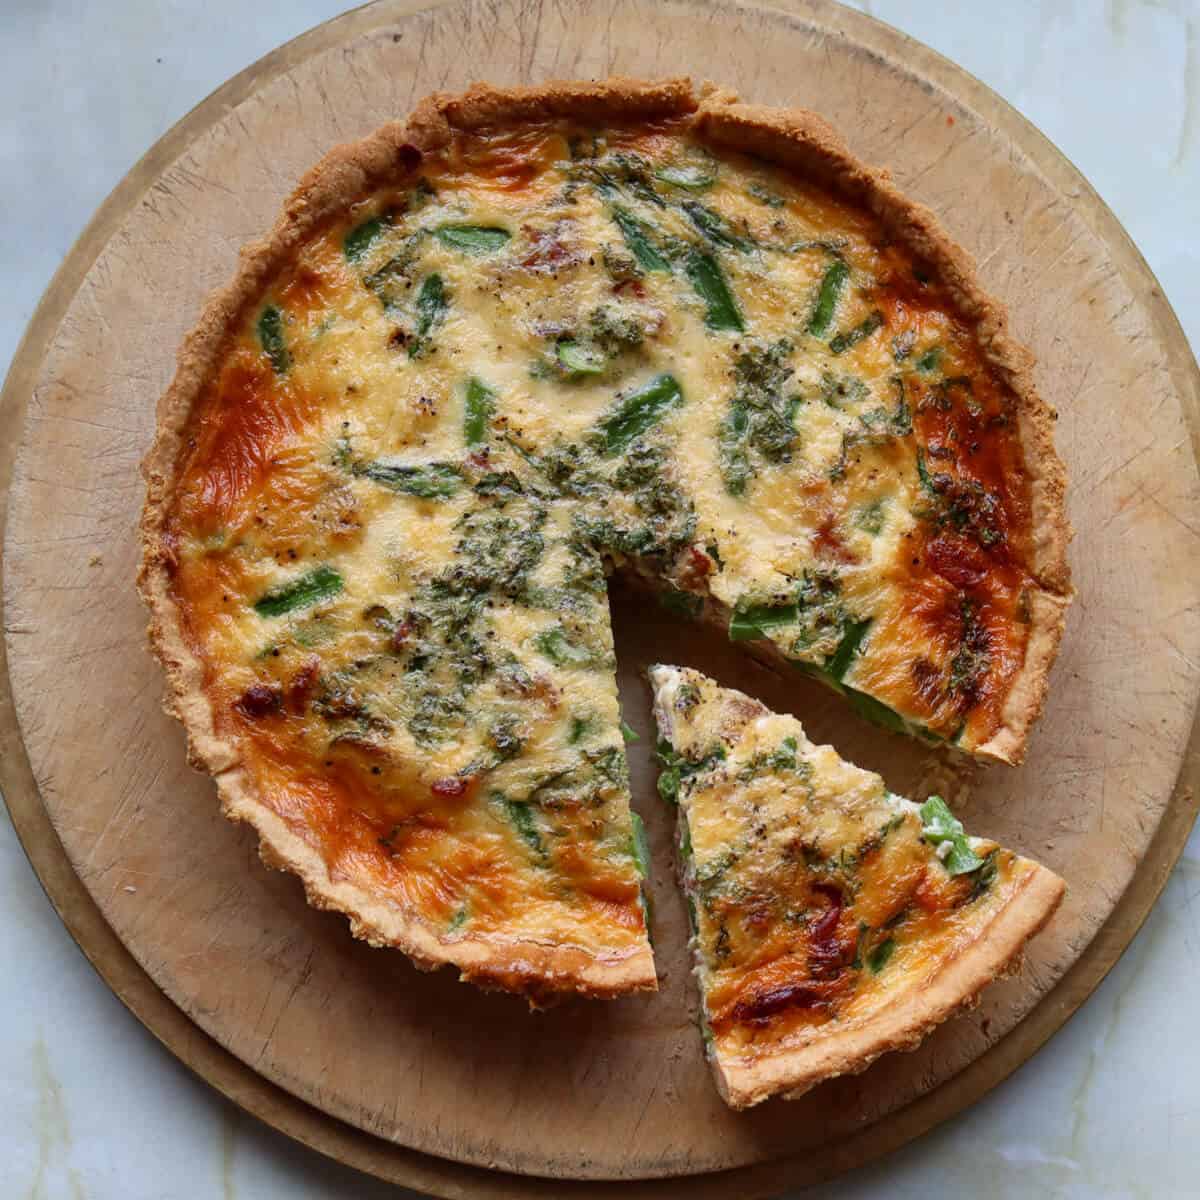 An asparagus and crispy prosciutto quiche on a wooden serving board